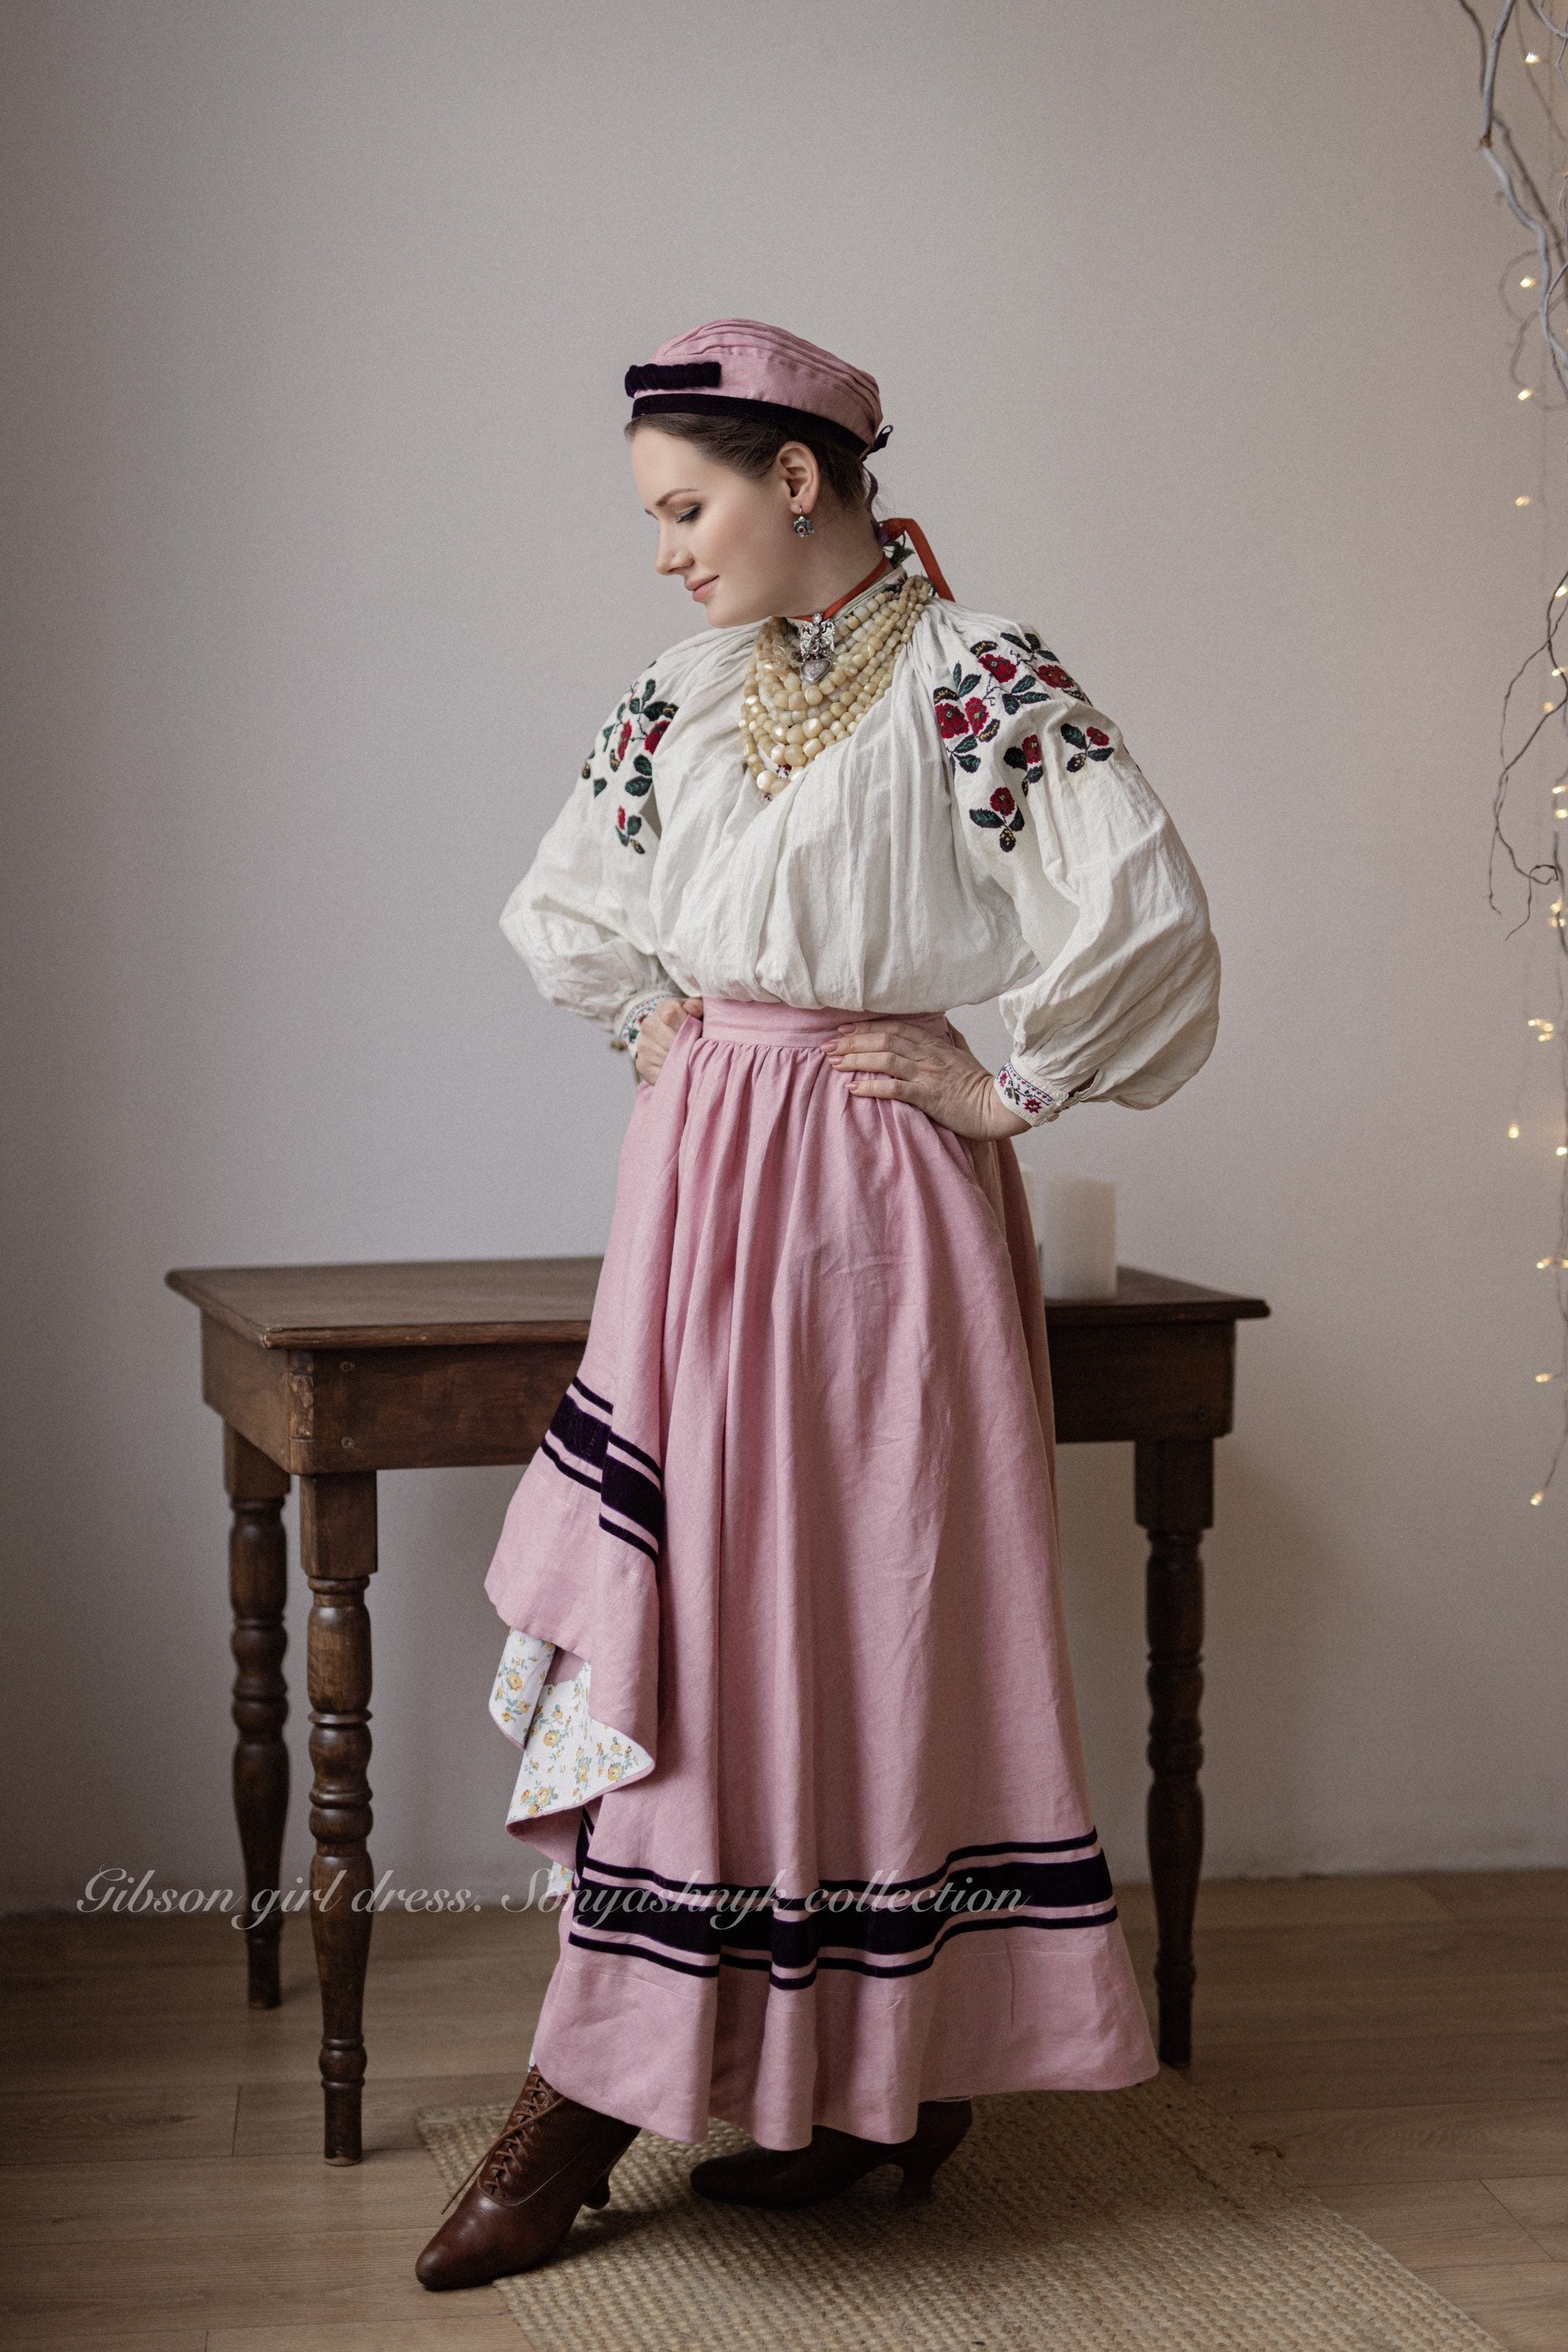 Girls Hungarian National Folk Costume Dress, Embroidered, Hungary, Eastern  European, Heritage Days, International, Traditional Outfit, NEW 